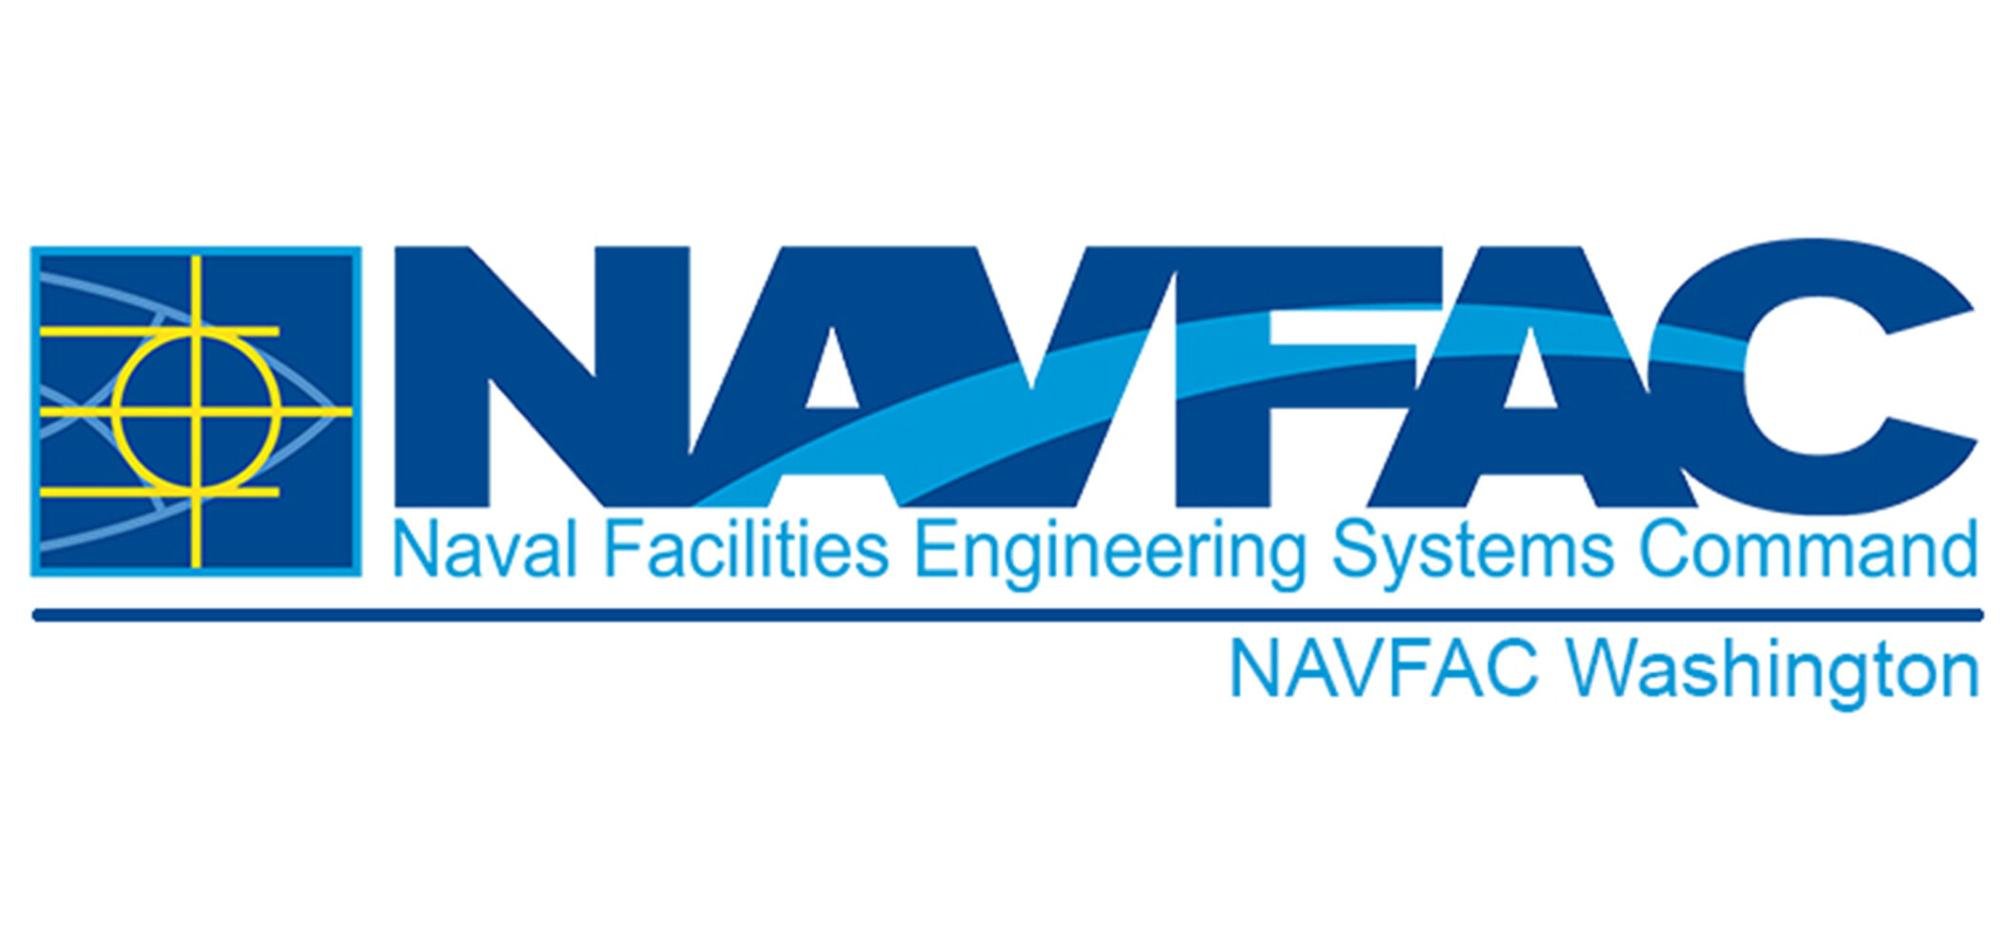 NAVFAC Washington Awards Contract to Replace Windows at Naval Research